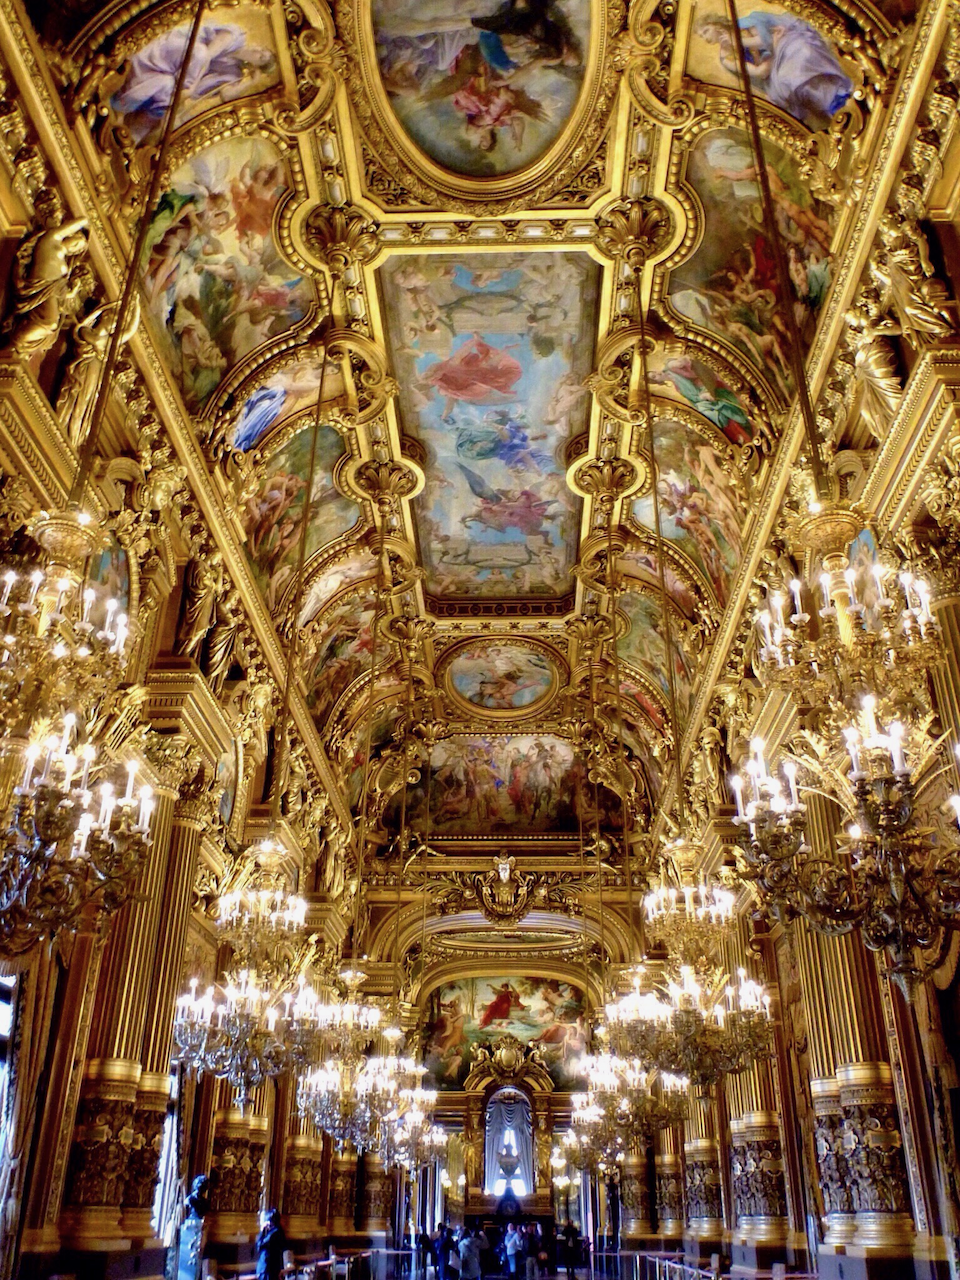 The details of the ceiling - Opera Garnier reception hall - Paris - France